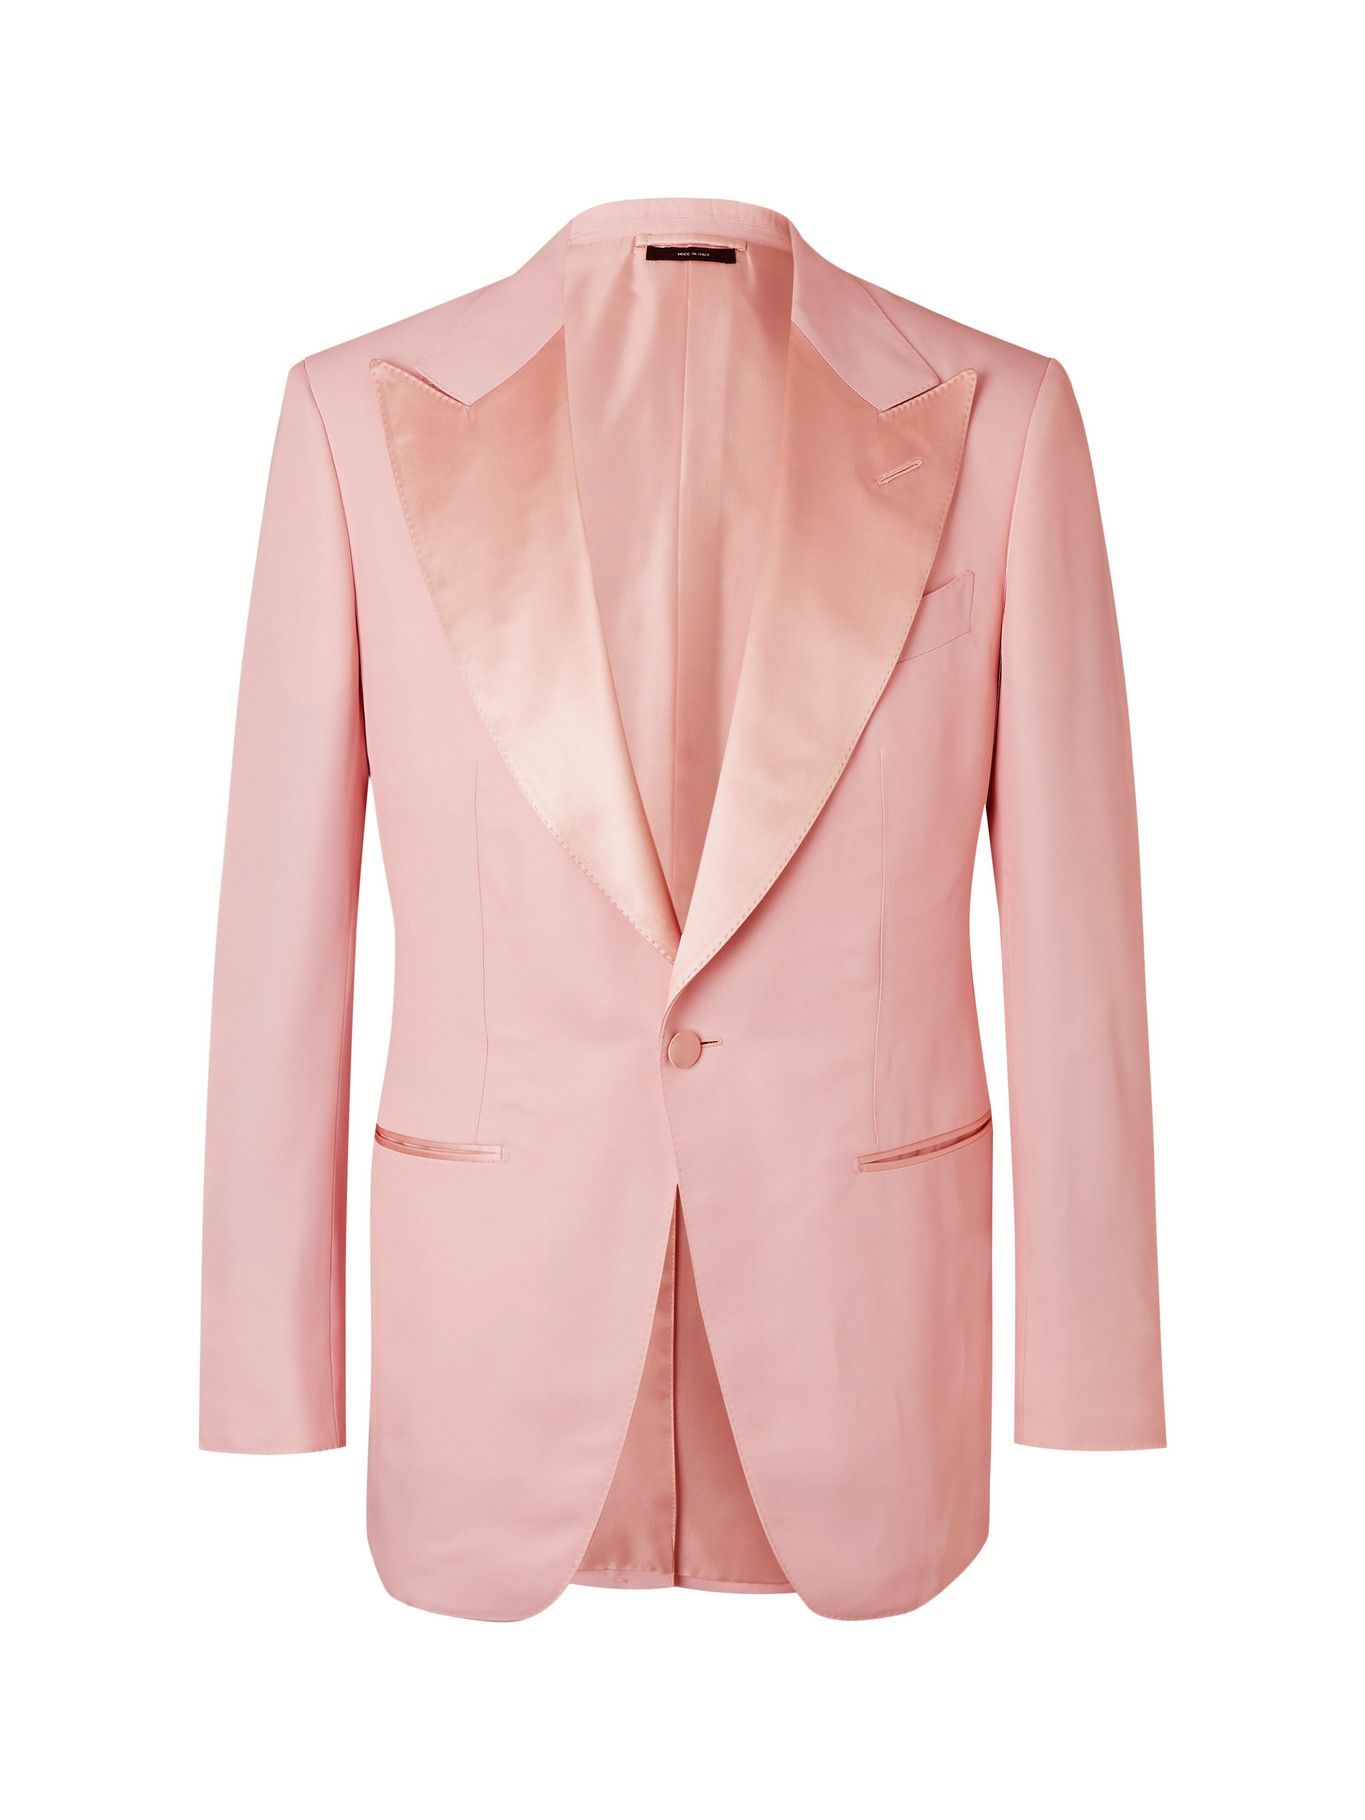 TOM FORD - Atticus Satin-Trimmed Twill Tuxedo Jackt - Pink TOM FORD